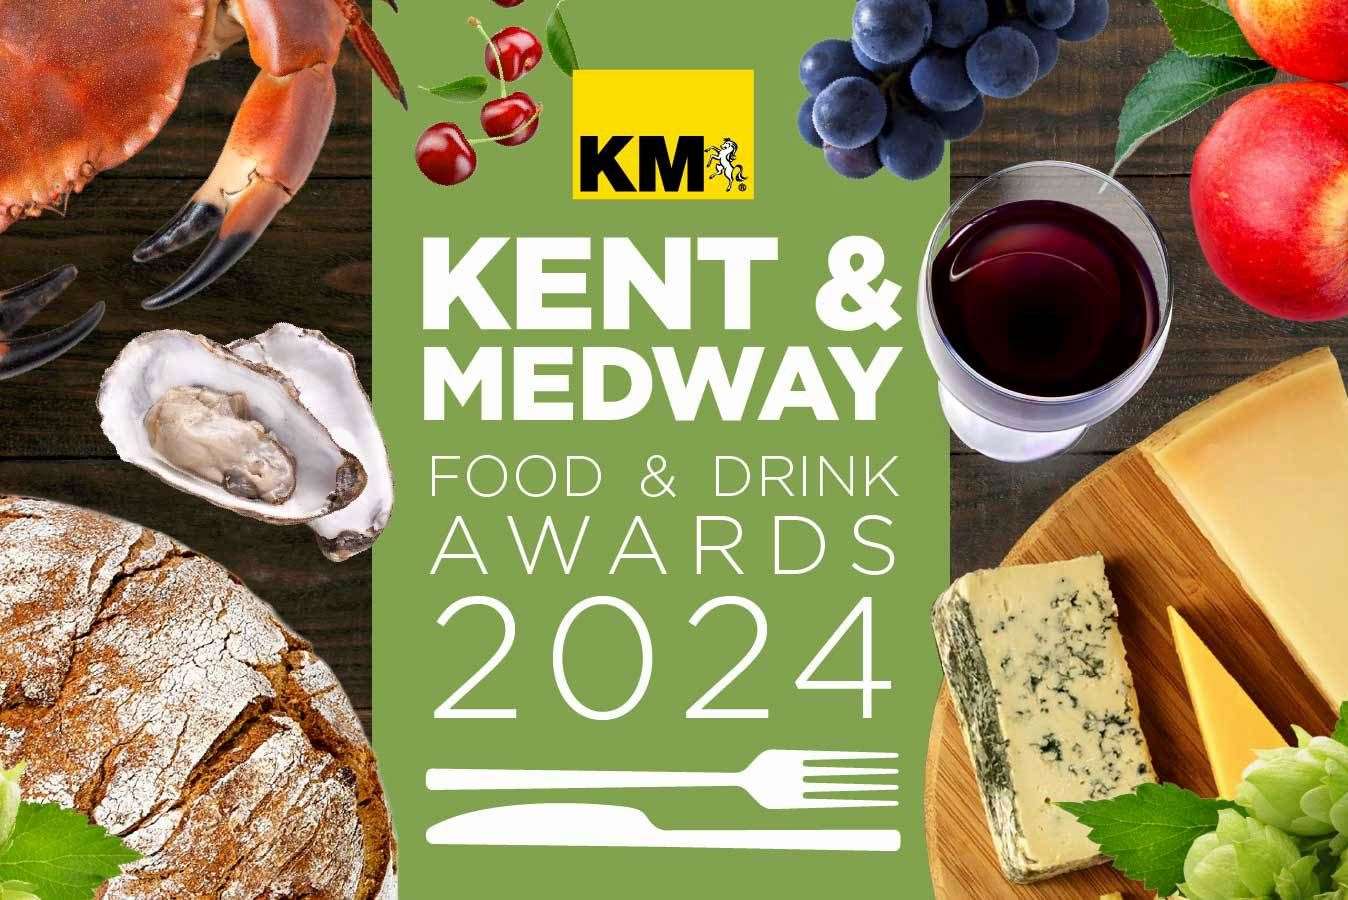 We’re announcing our last round of finalists for the Kent & Medway Food & Drink Awards